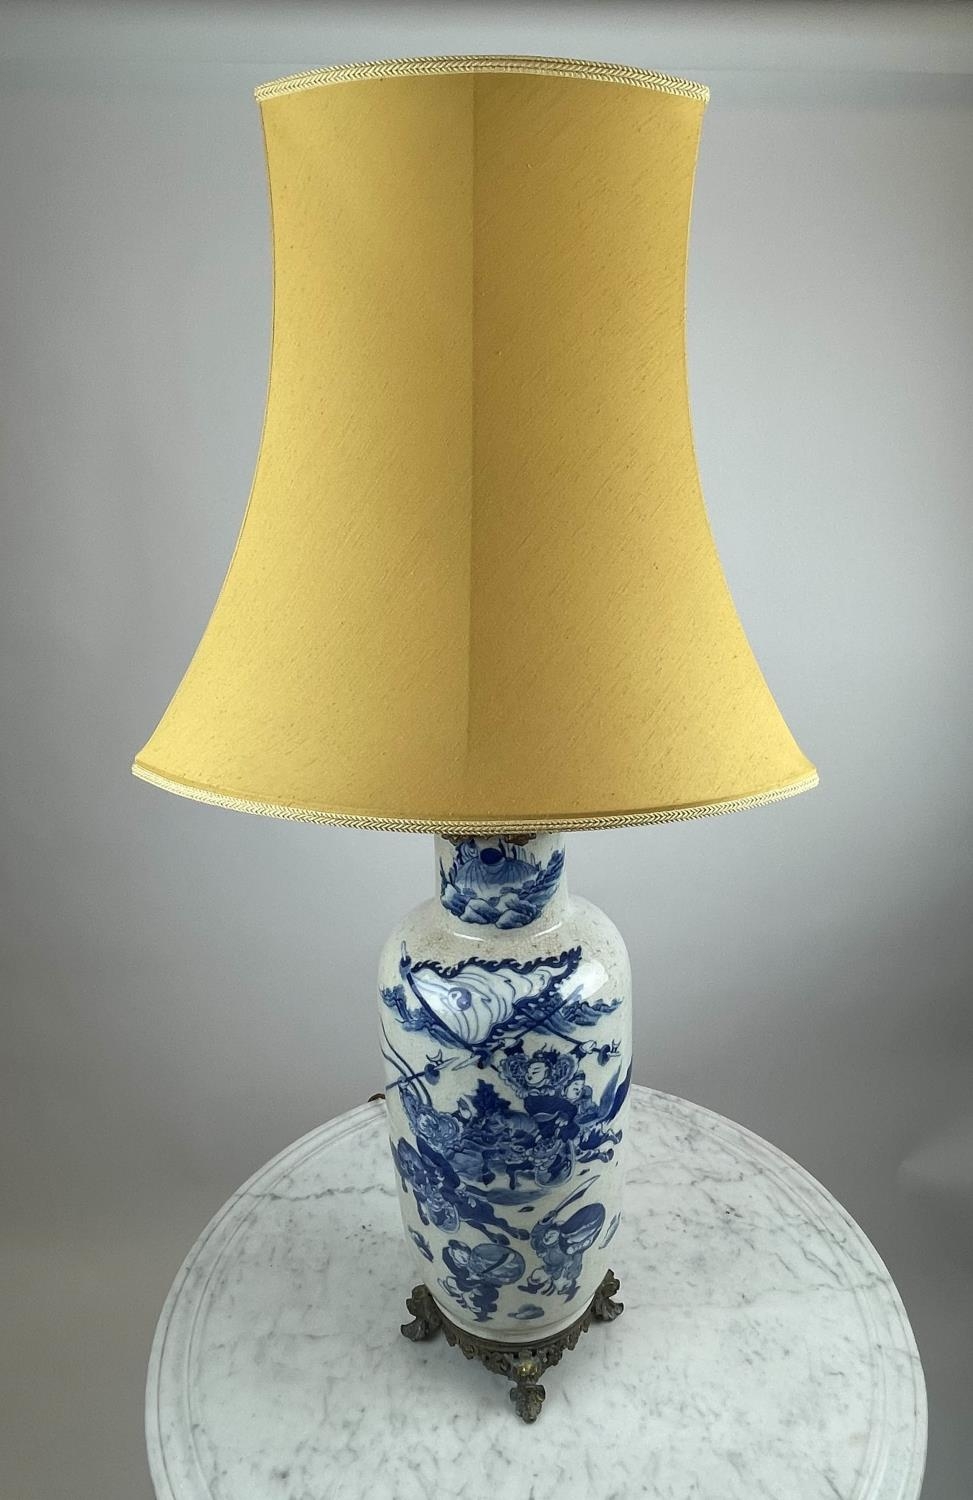 CHINESE LAMP, 19th century blue and white converted vase with battle scene decoration and